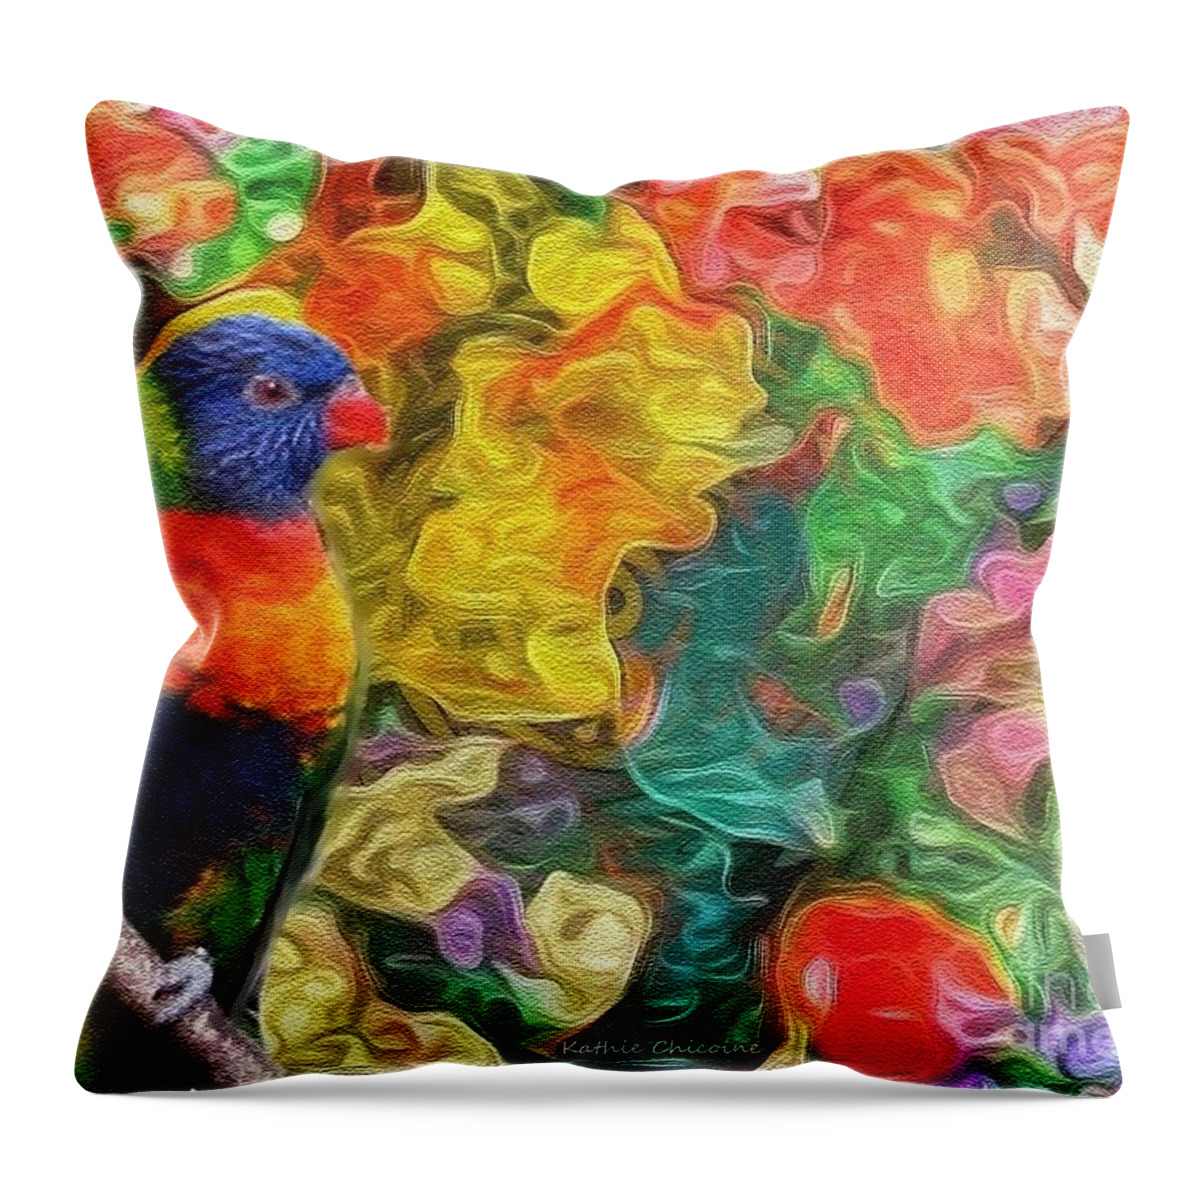 Photographic Art Throw Pillow featuring the digital art Exotica by Kathie Chicoine